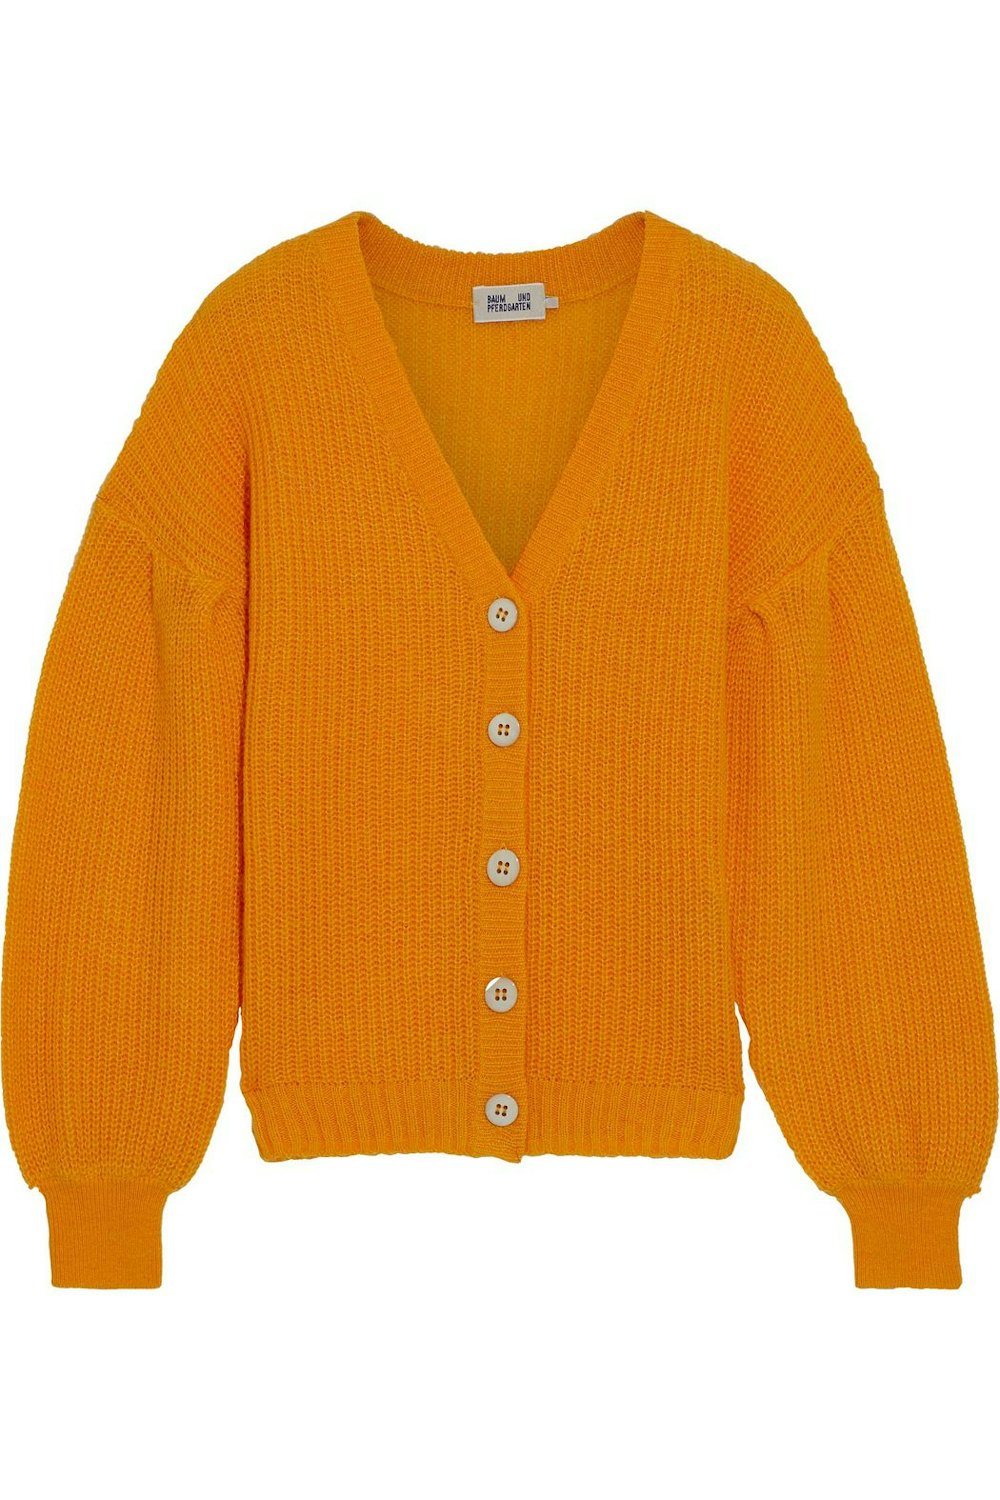 Celine knitted cardigan